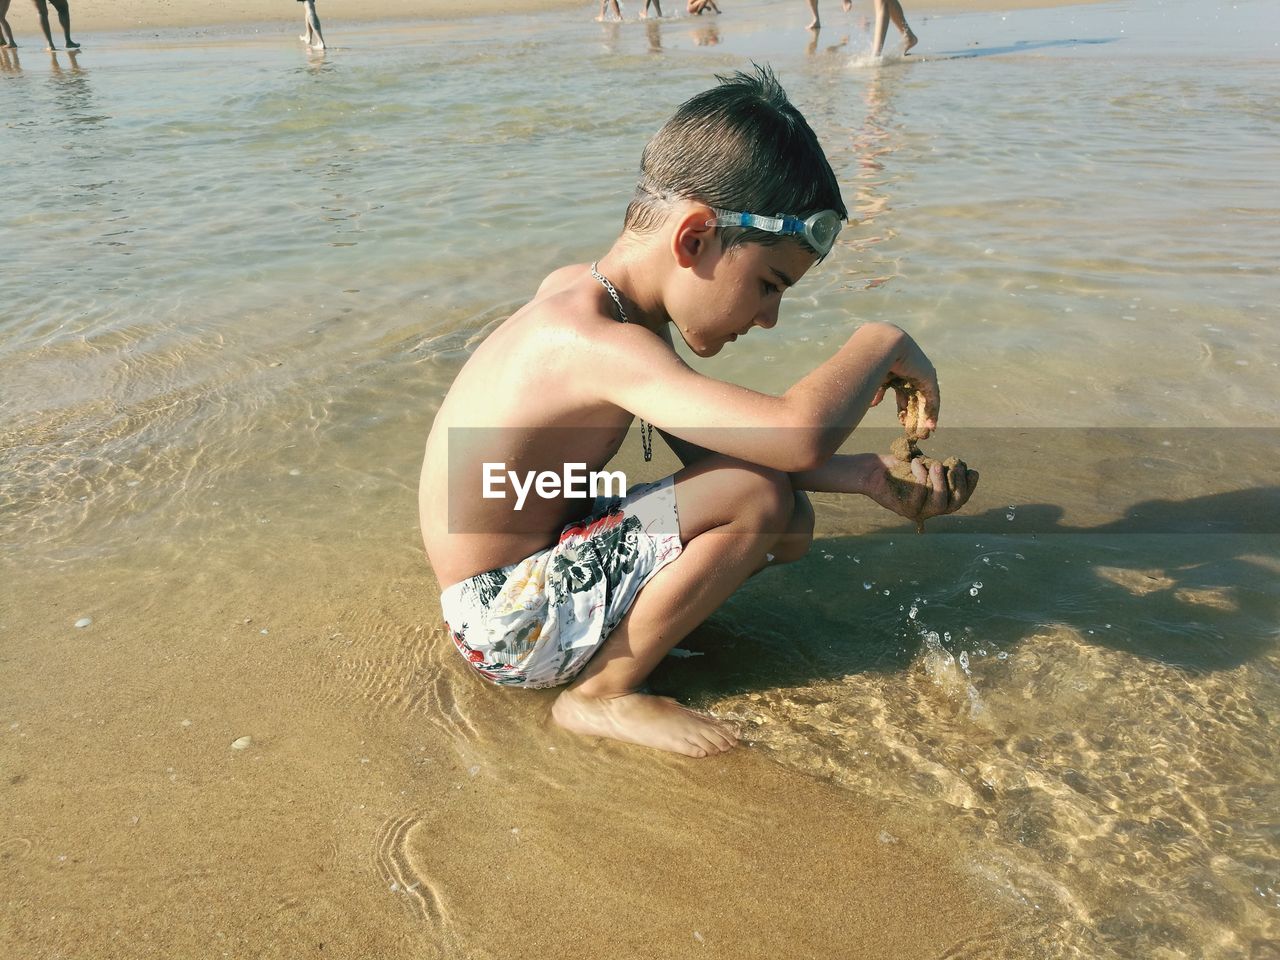 Shirtless boy playing with sand while crouching at beach